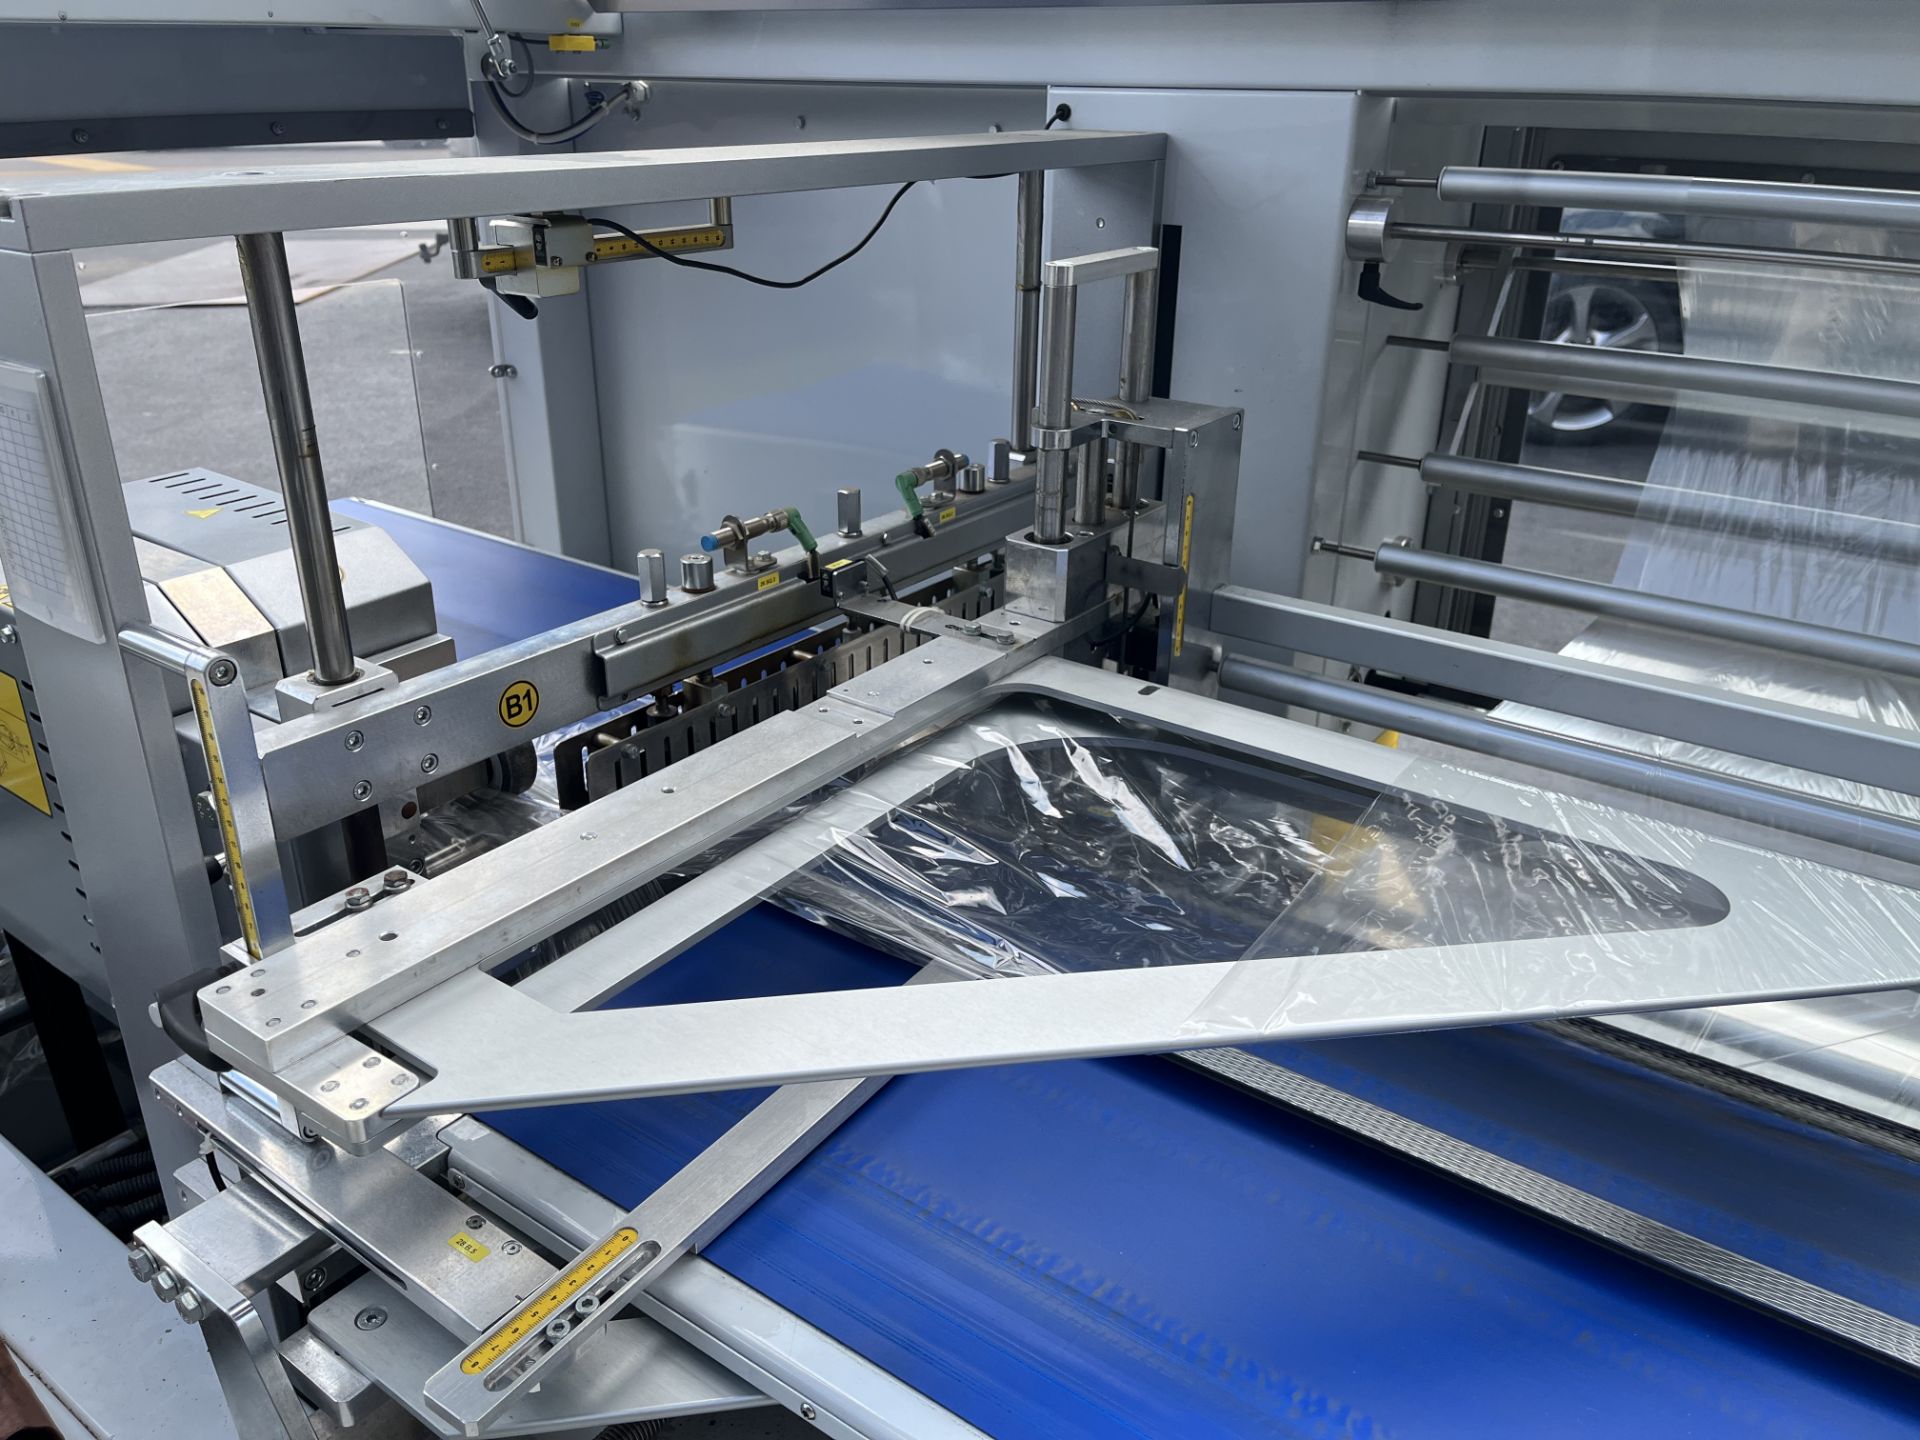 Auto Side Sealer, Heat Tunnel, and Infeed Conveyor - Image 11 of 60